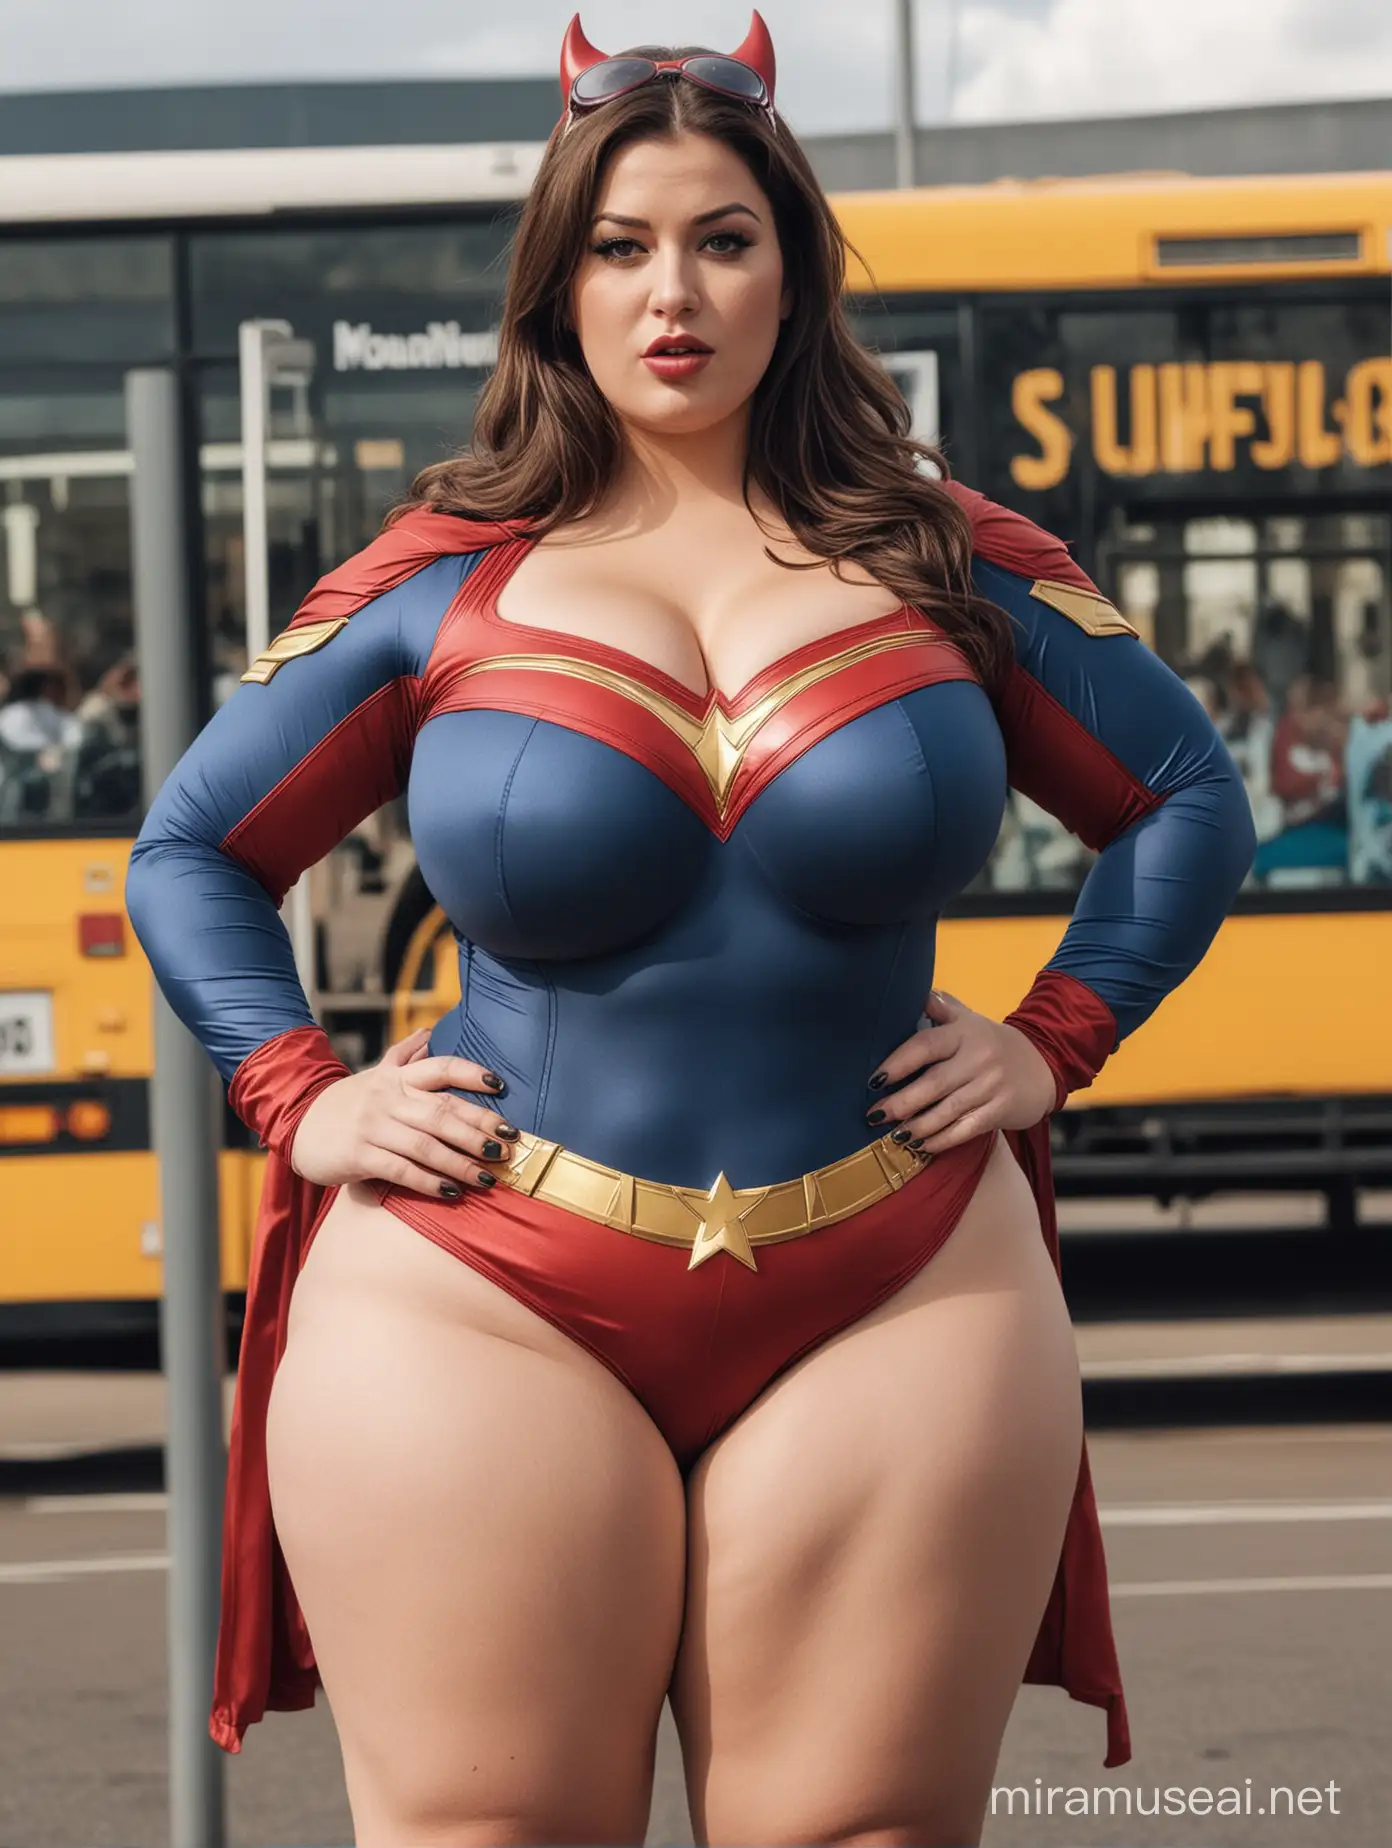 Superhero Woman with Curves Waiting at Bus Station